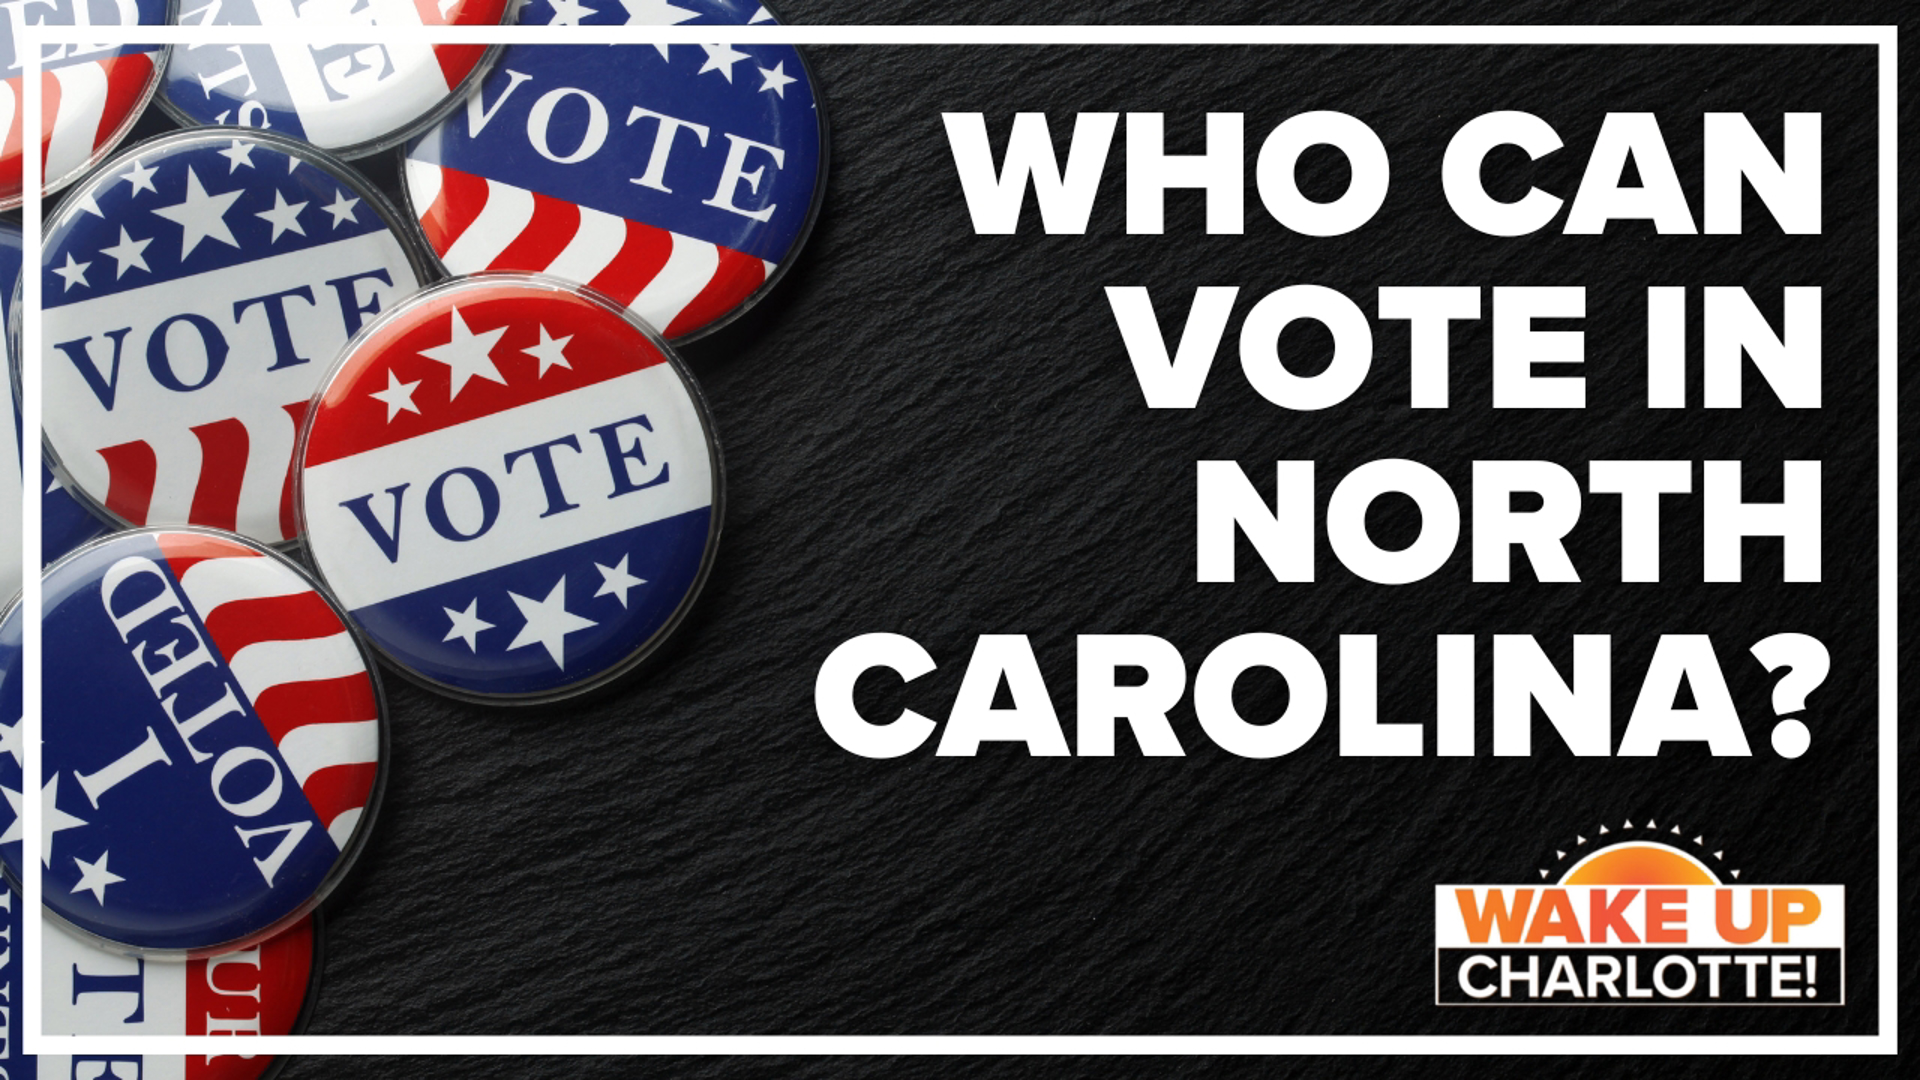 You do not need your ID to vote here in North Carolina, but according to the North Carolina State Board of Elections, you do have to be a U.S. Citizen.